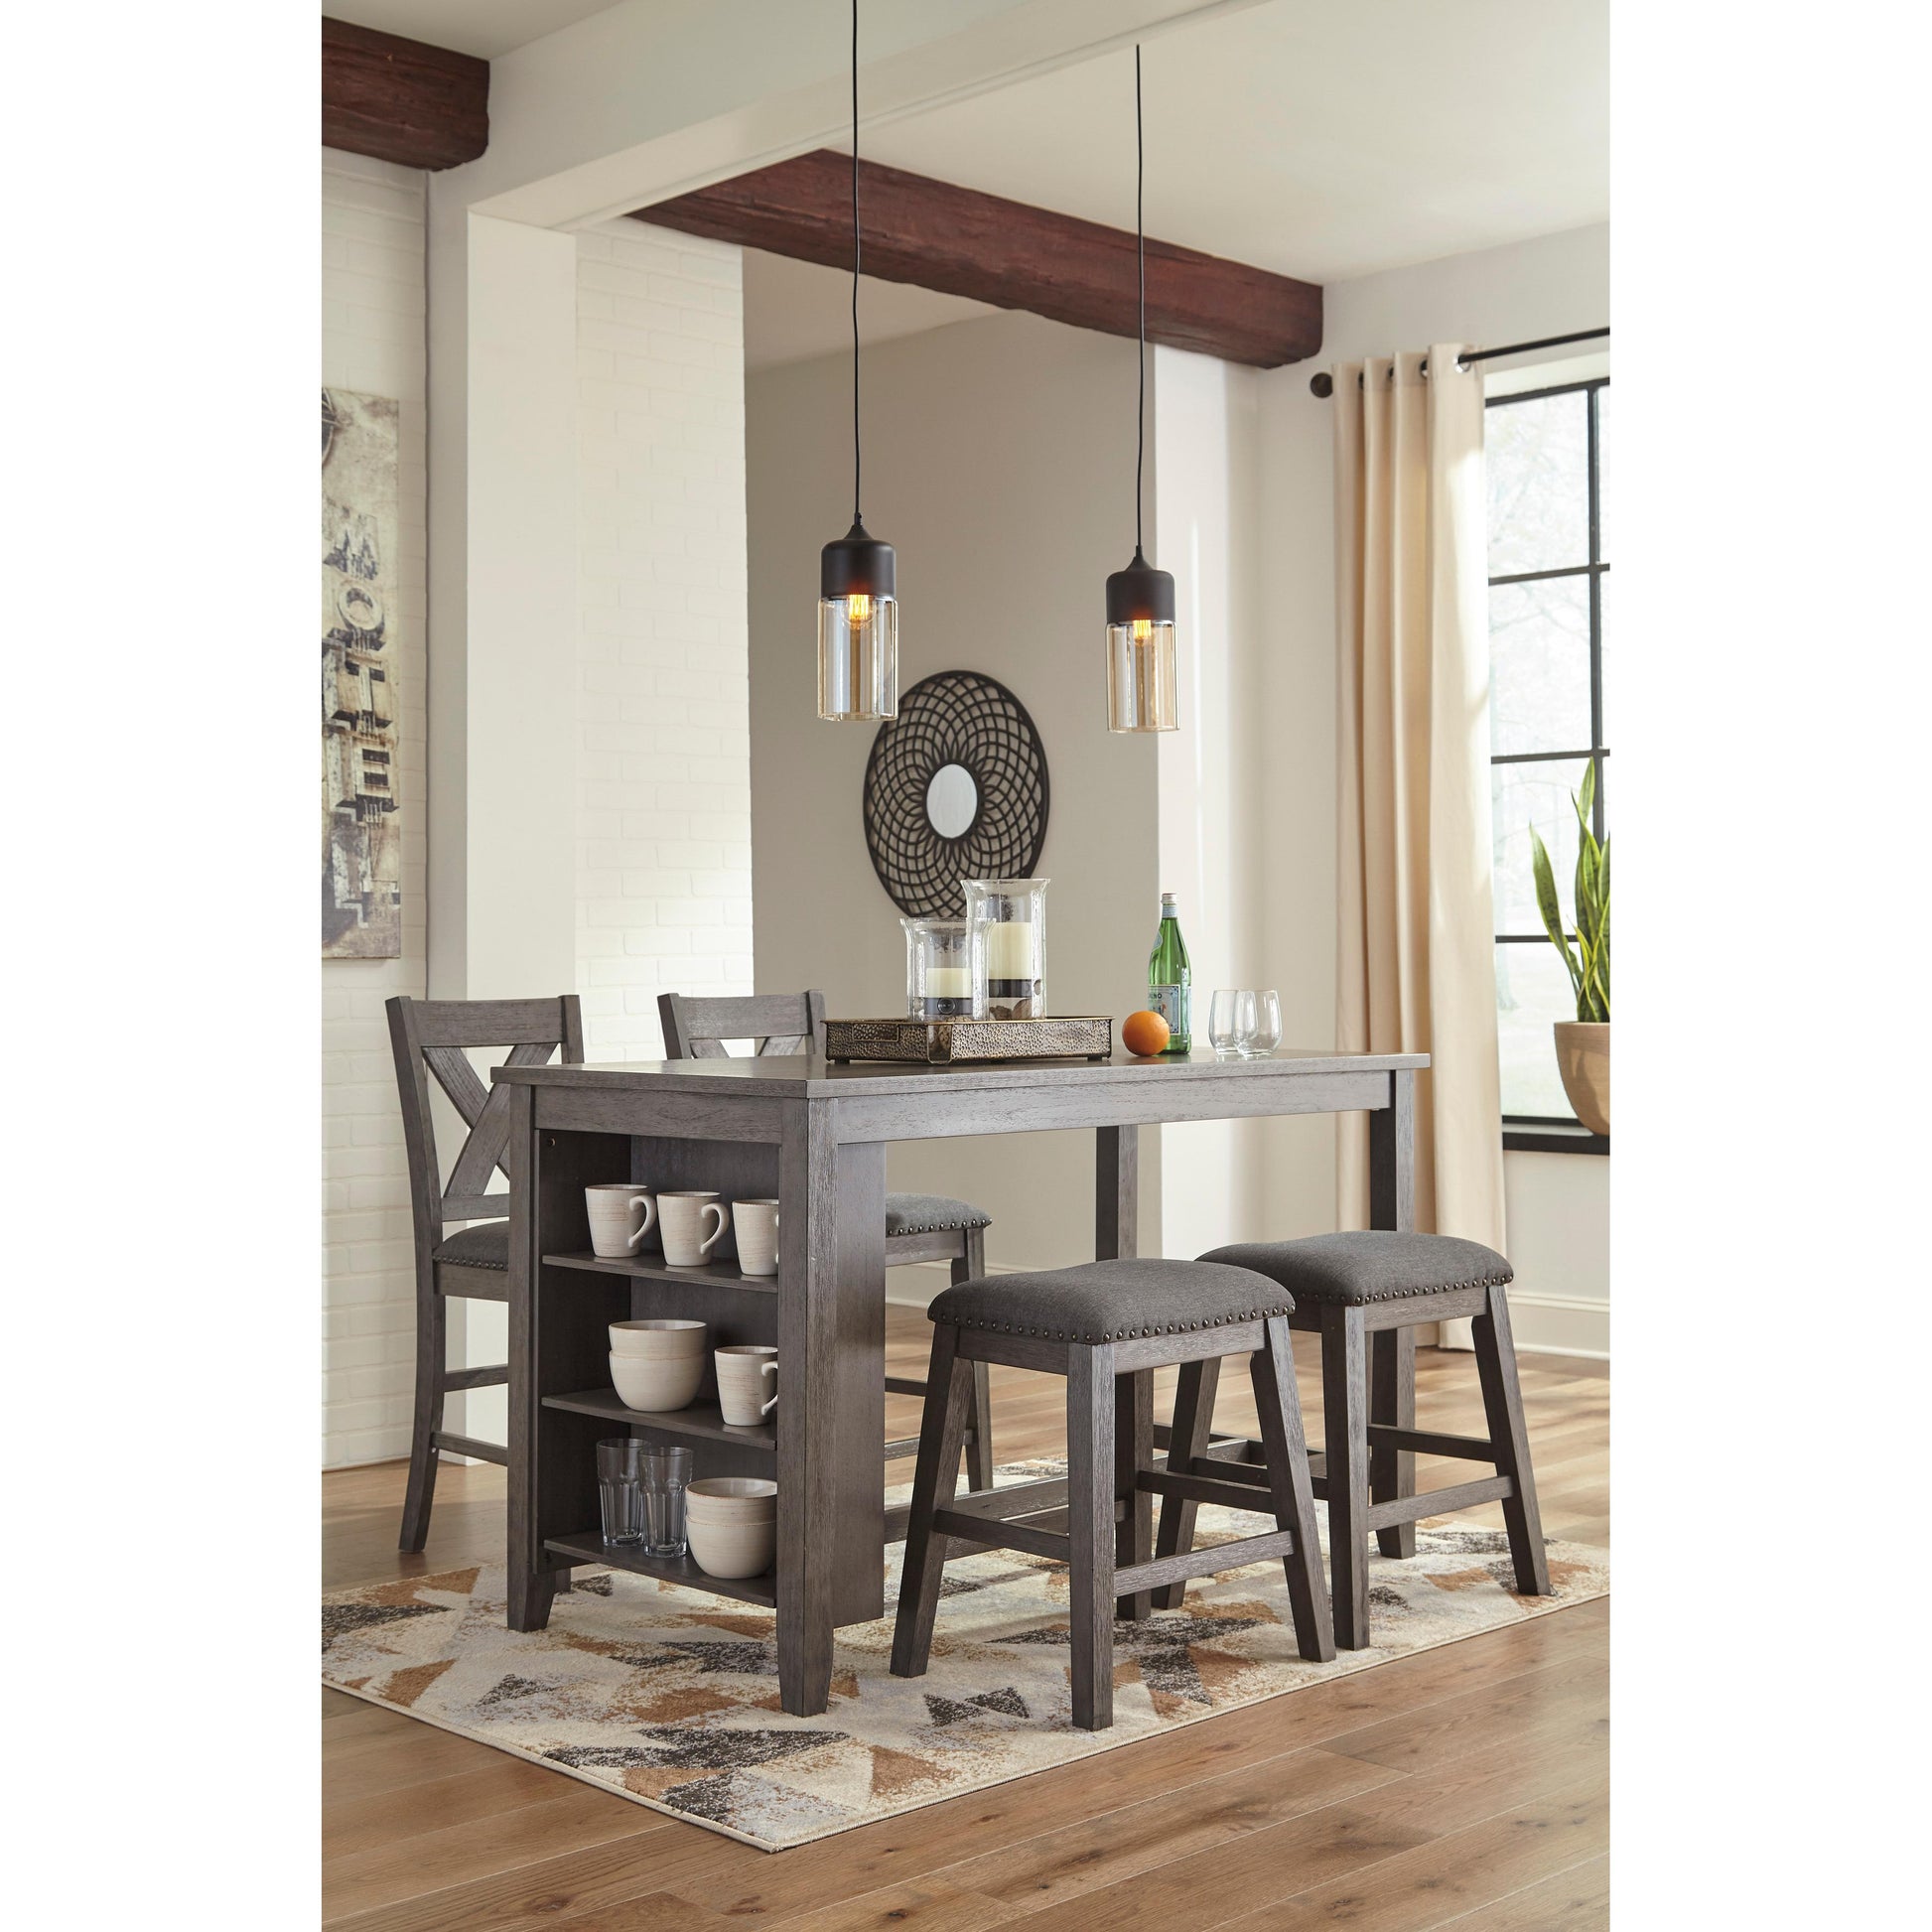 Signature Design by Ashley Caitbrook Counter Height Dining Table with Trestle Base D388-13